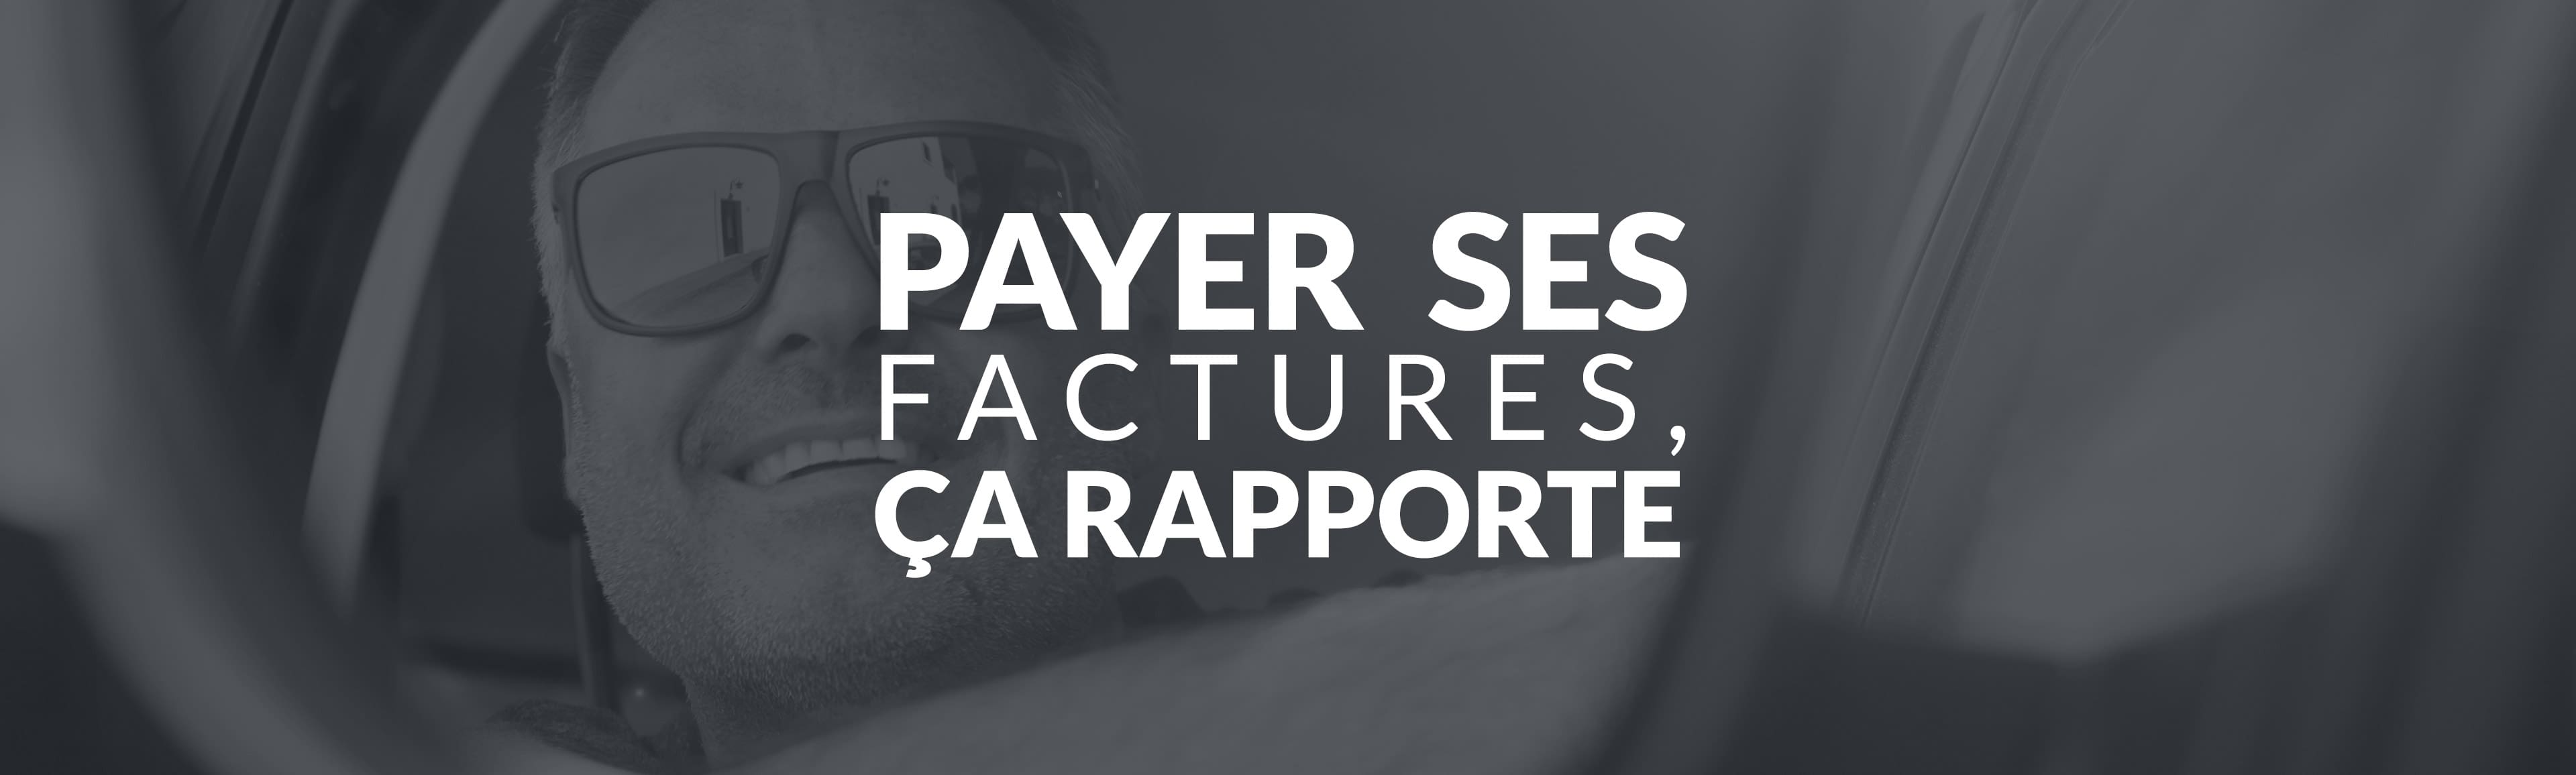 payer ses factures, ca rapport